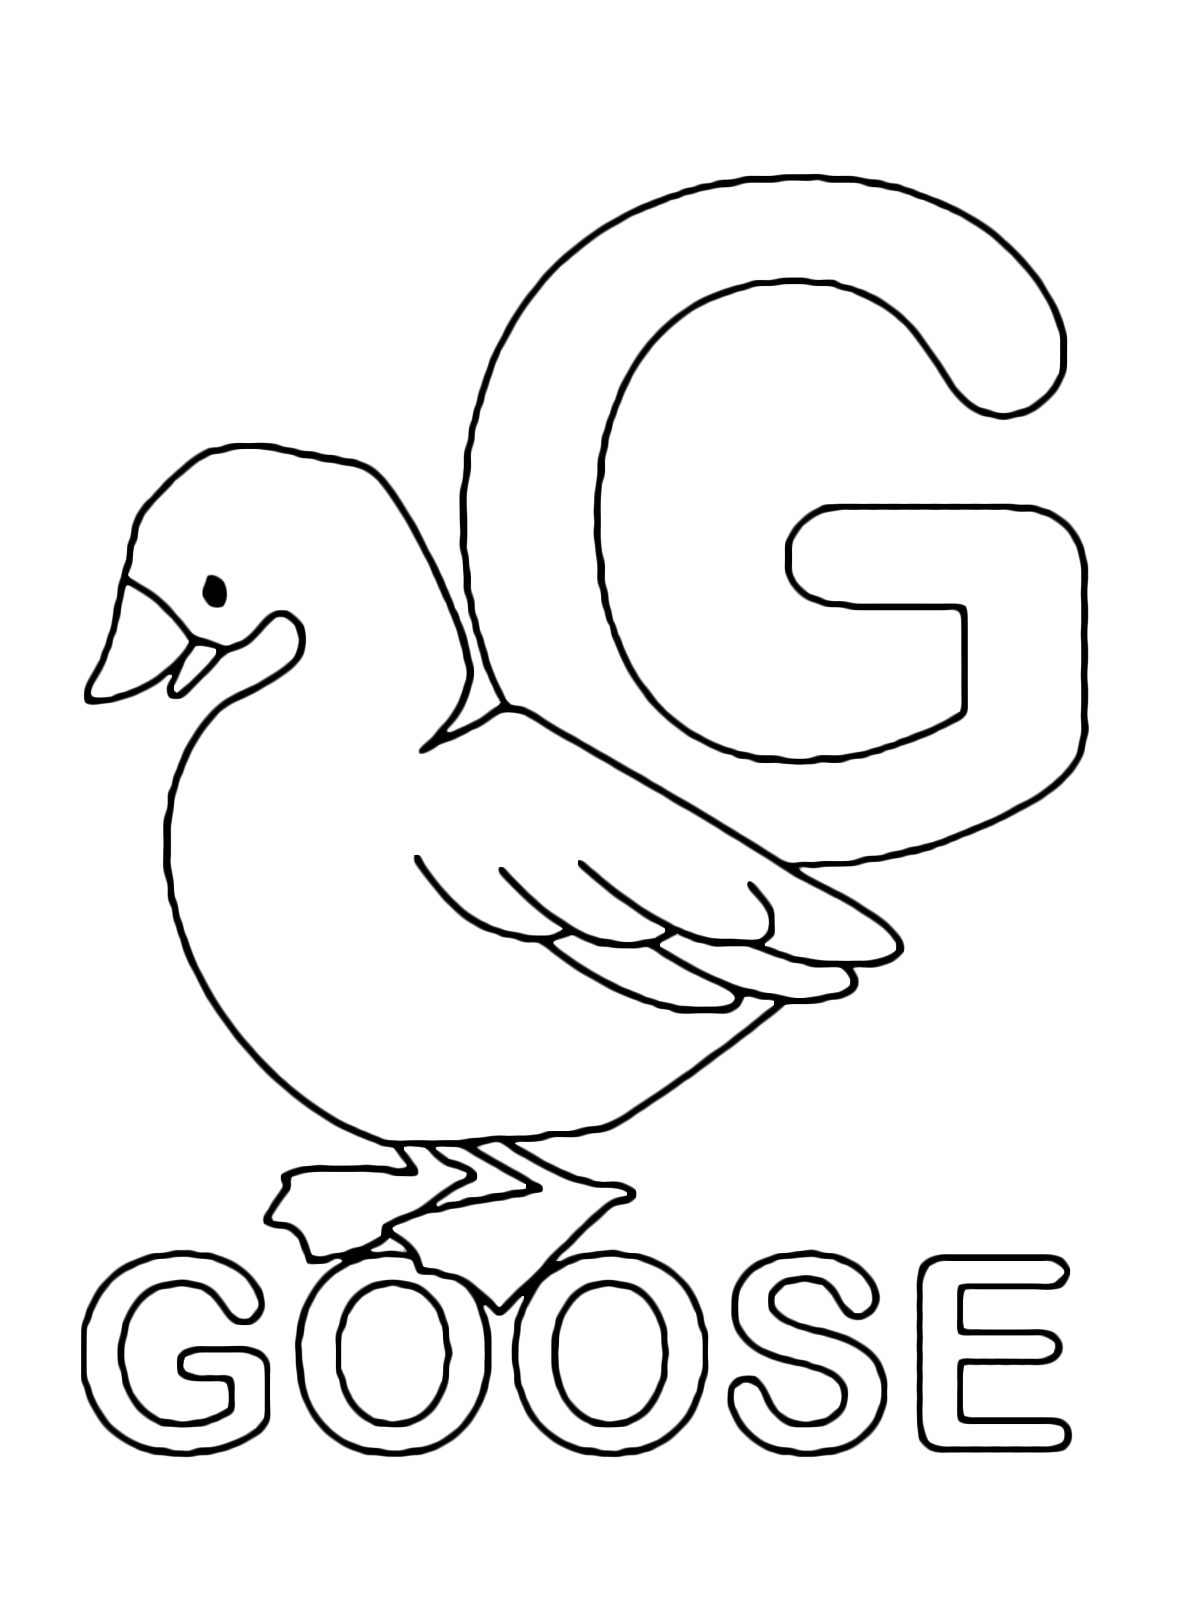 Letters and numbers - G for goose uppercase letter